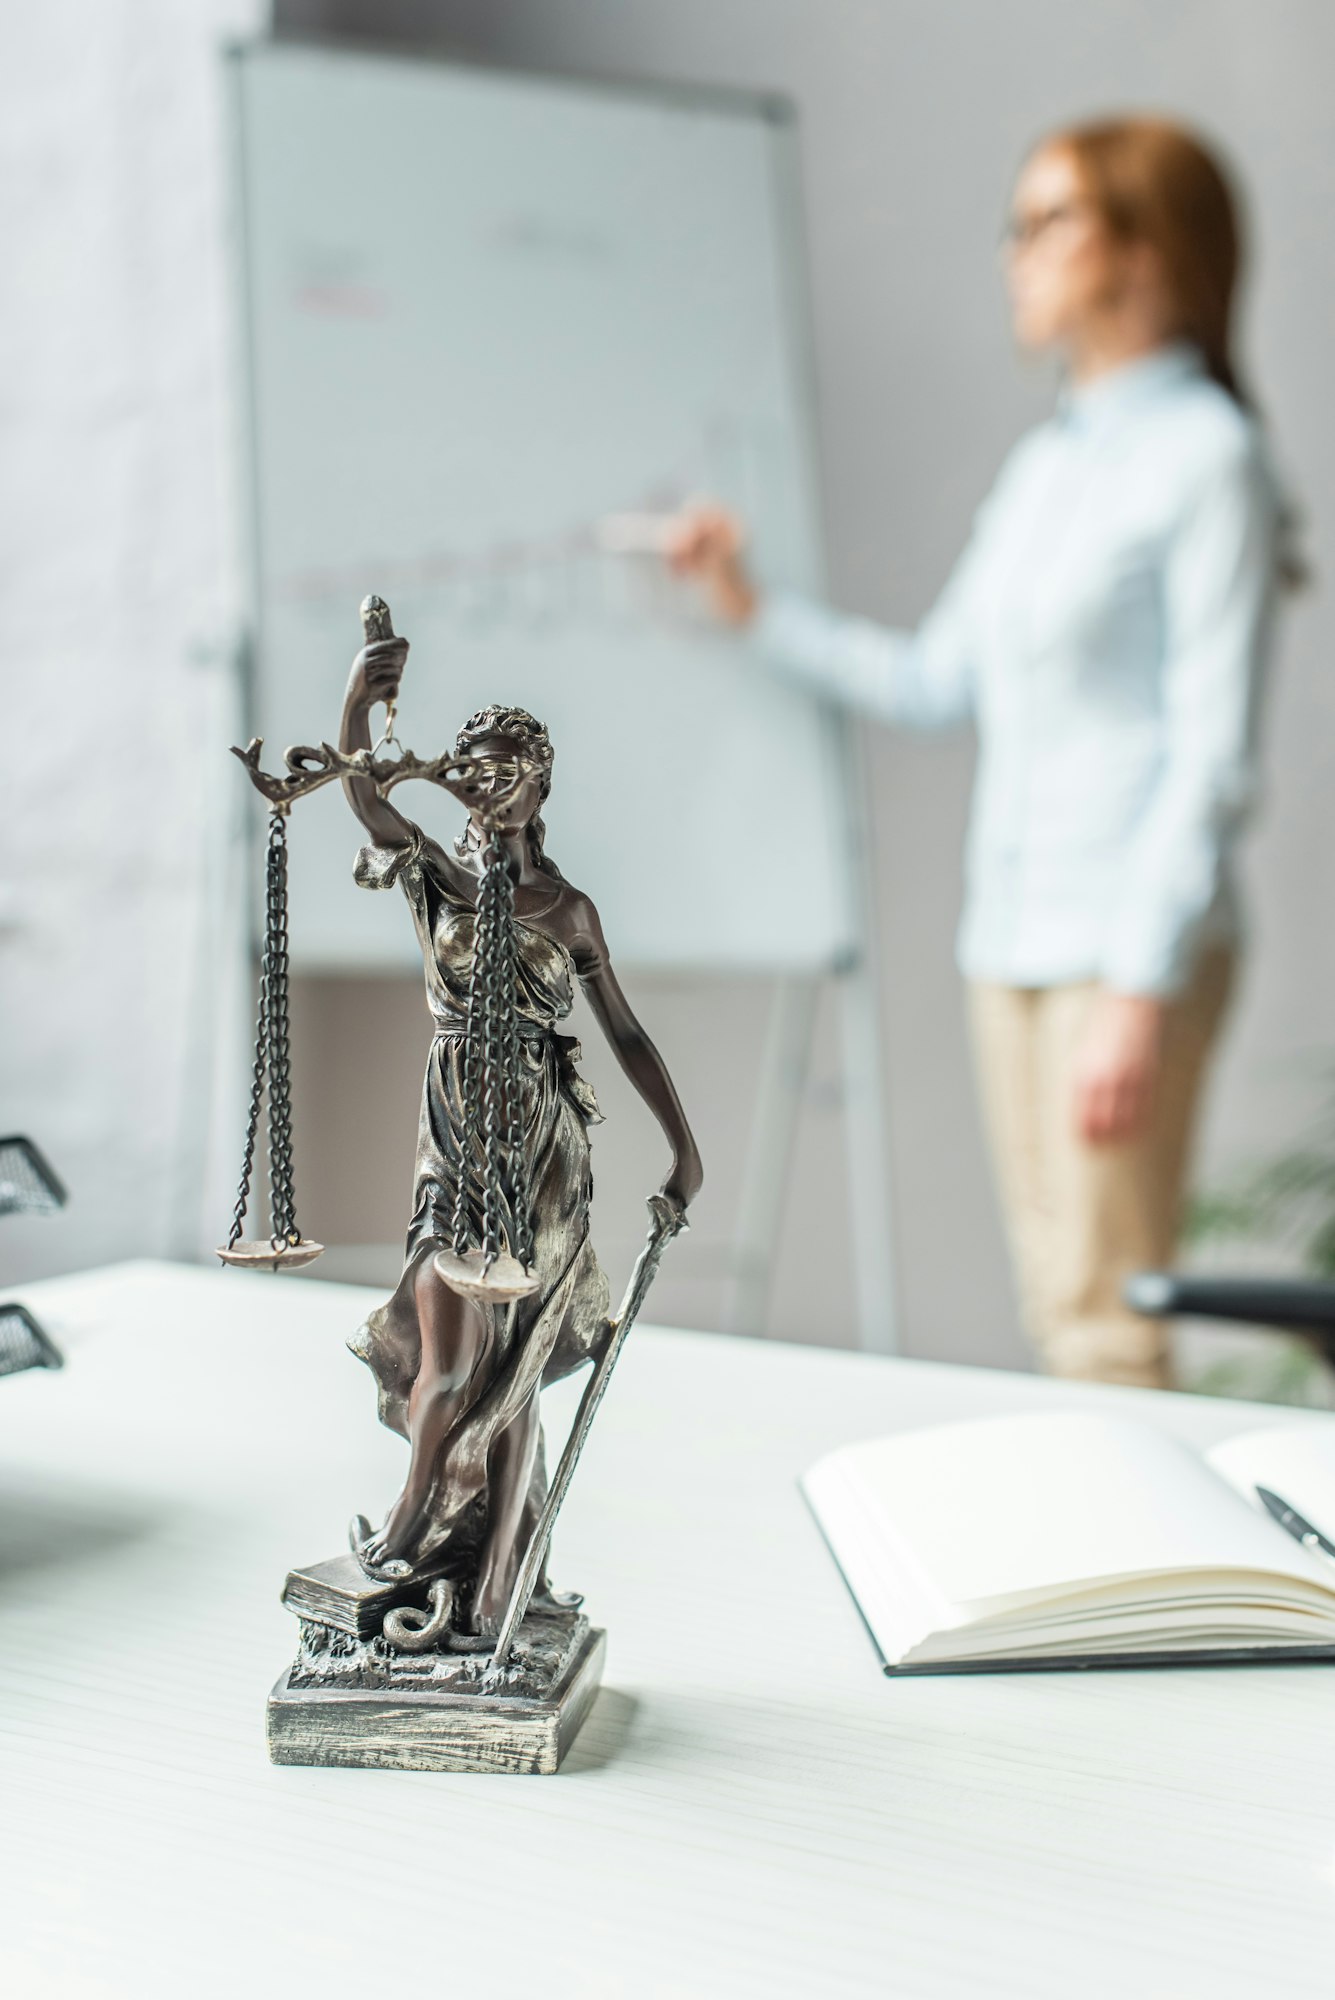 Themis figurine on workplace with blurred female lawyer on background